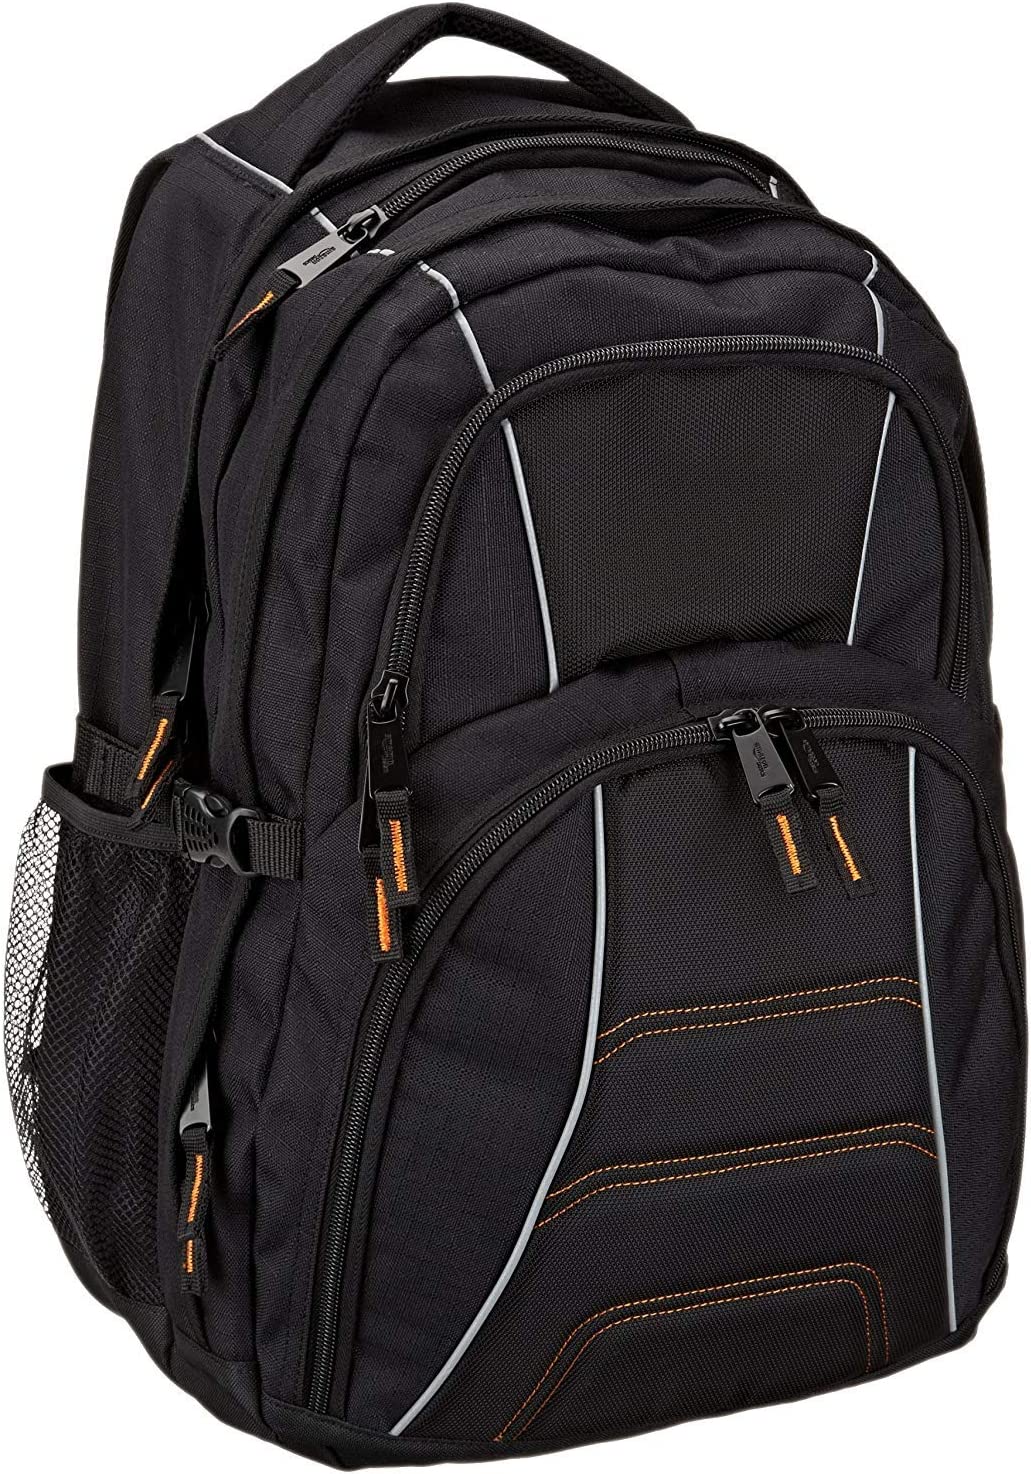 Review of Amazon Basics Laptop Backpack - Fits Up to 17-Inch Laptops